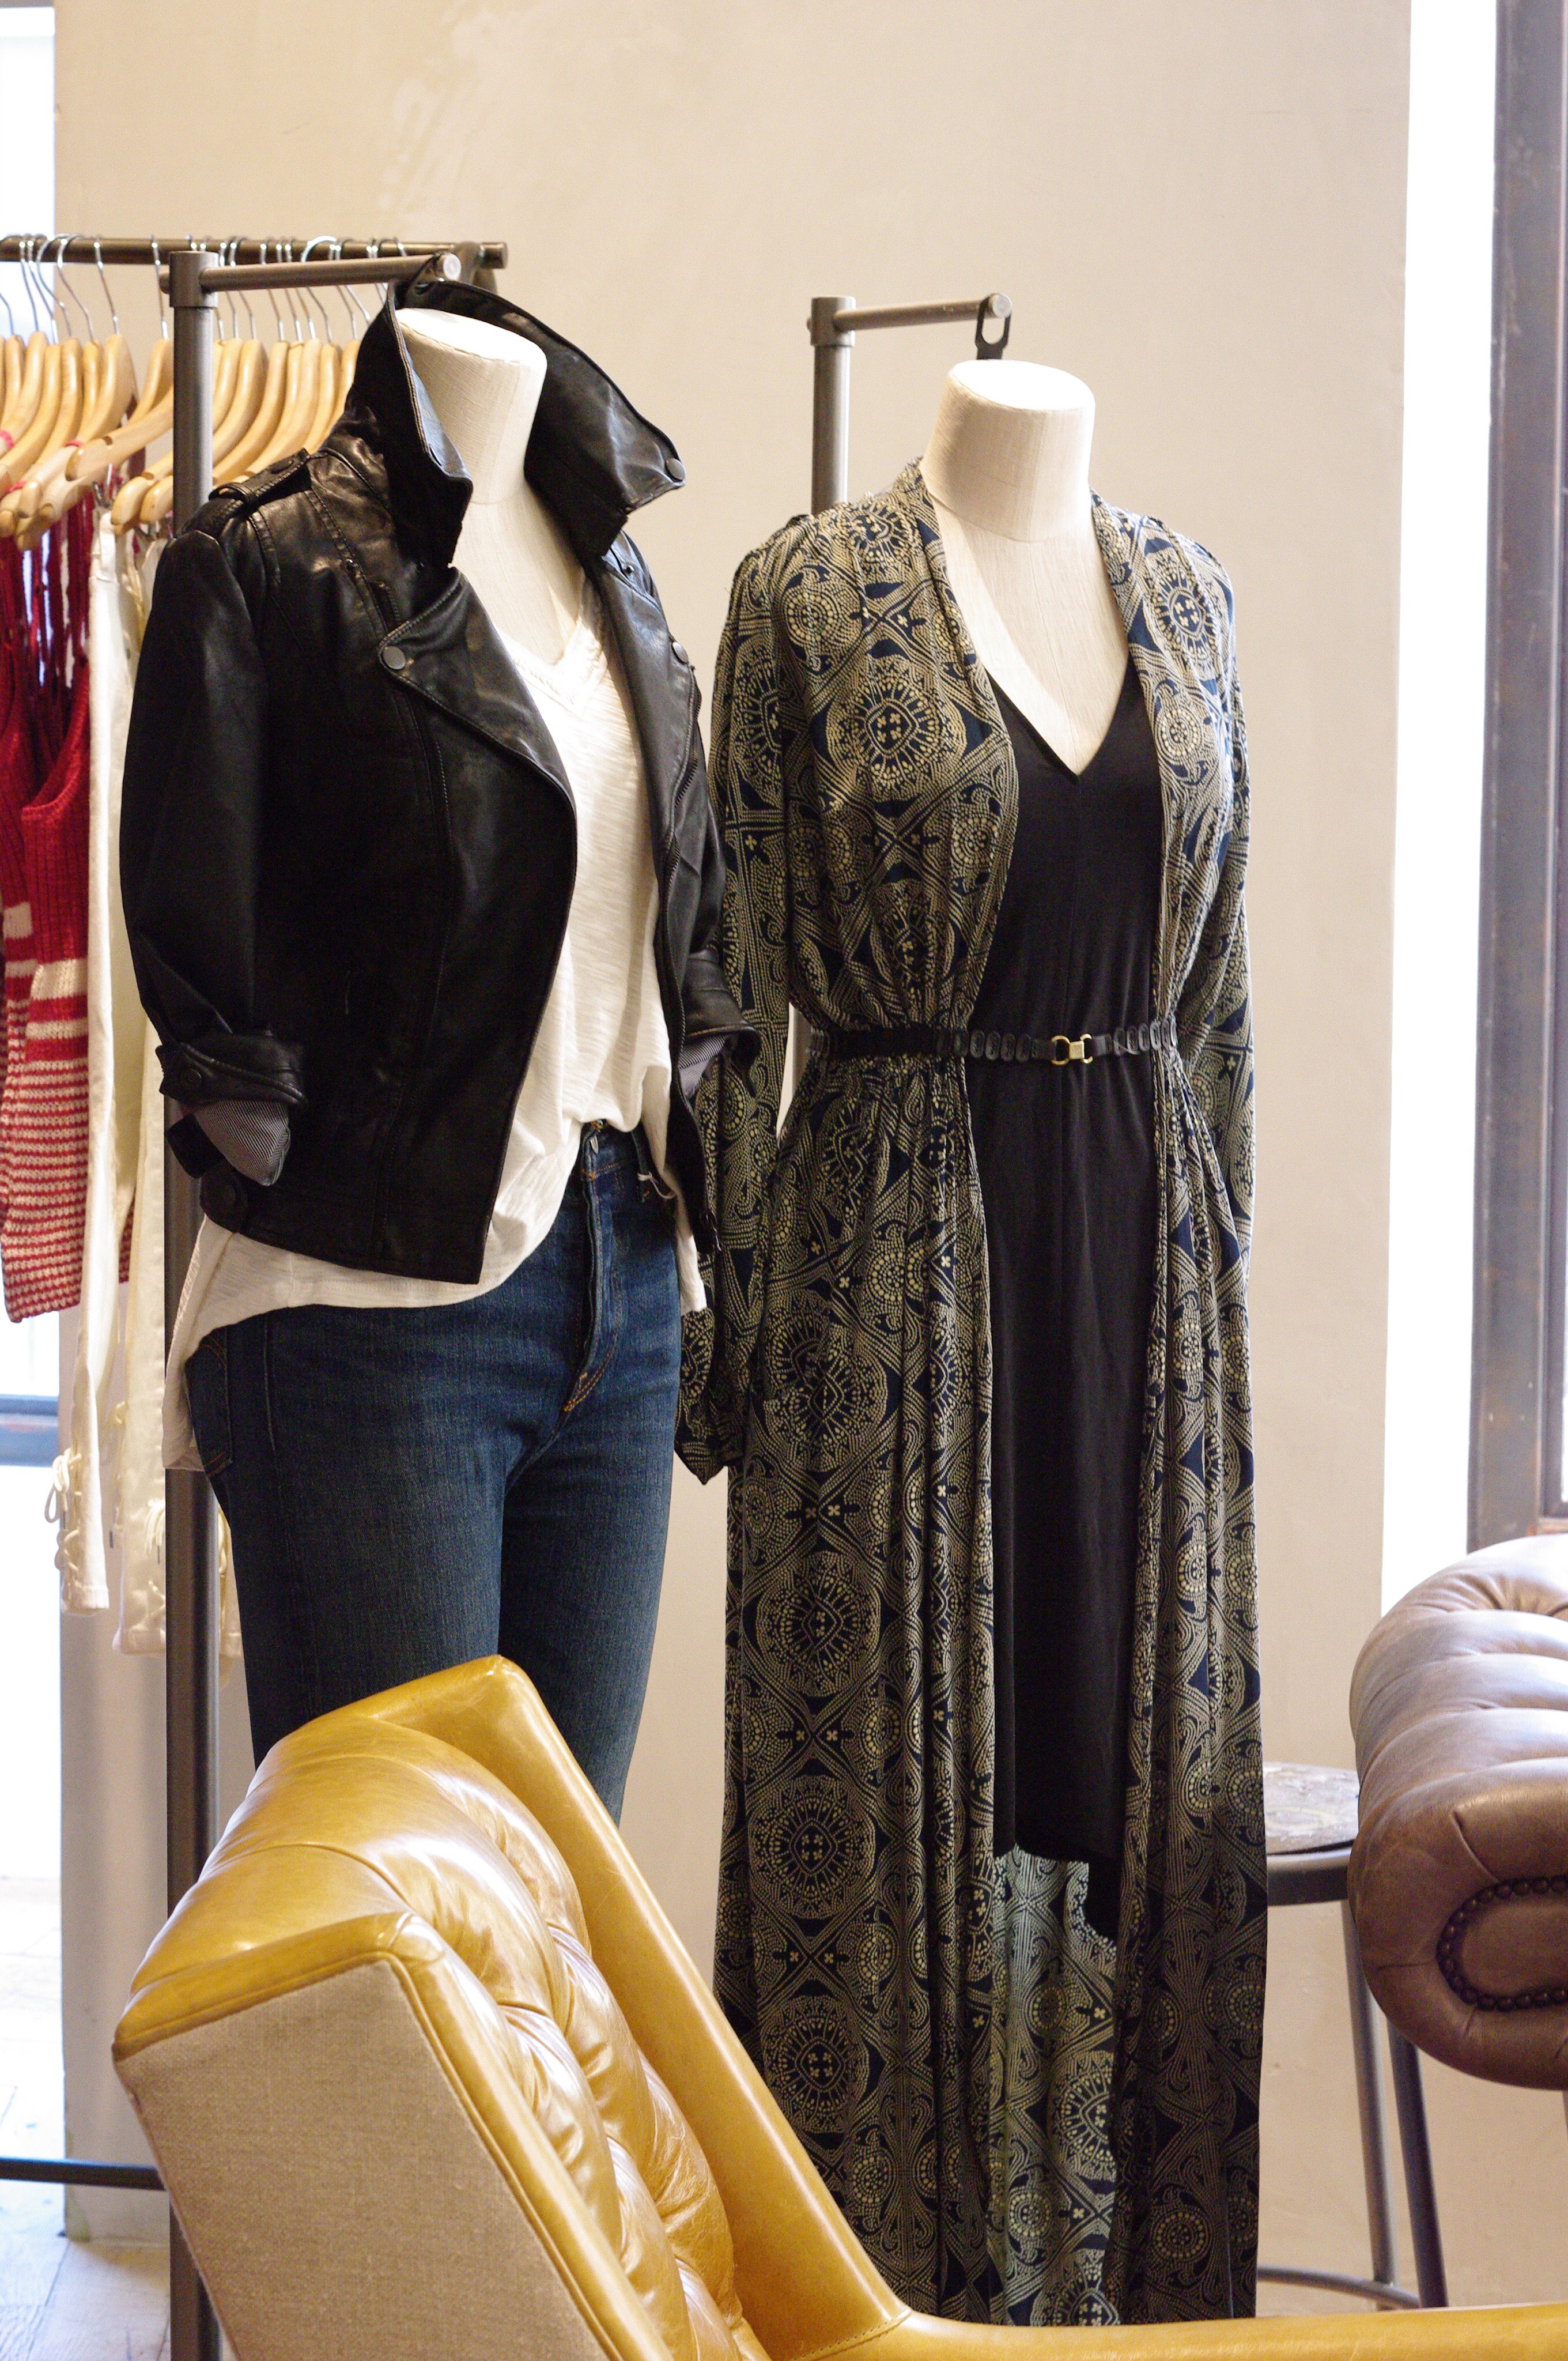 Using Anthropologie clothing, the group styled fictional 'Sweetbitter' characters Tess and Simone.